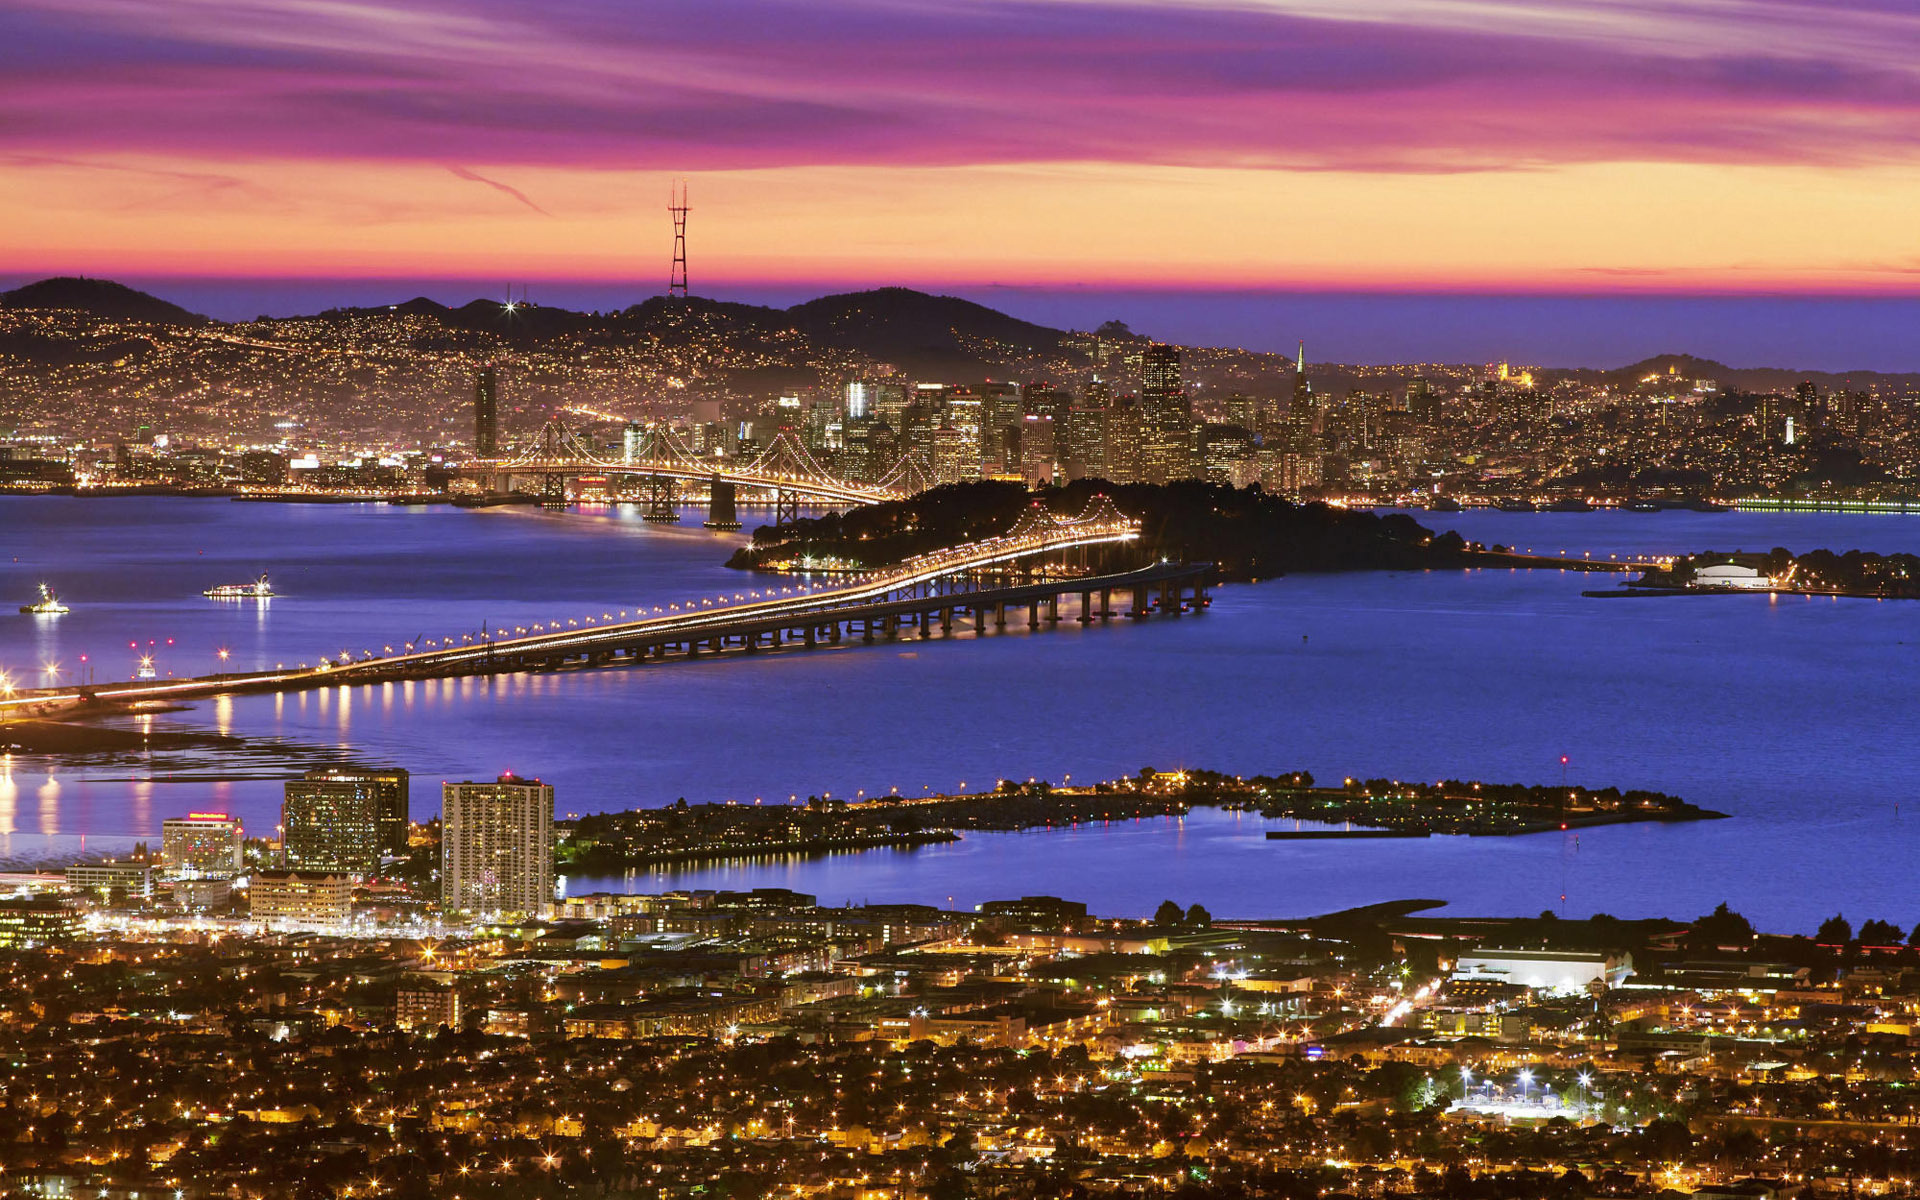 san, Francisco, California, Panorama, World, Architecture, Buildings, City, Skyline, Cityscape, Lights, Houses, Bridges, Tower, Skyscraper, Bay, Sound, Water, Scenic, View, Vehicles, Boats, Ship, Sky, Color, Suns Wallpaper